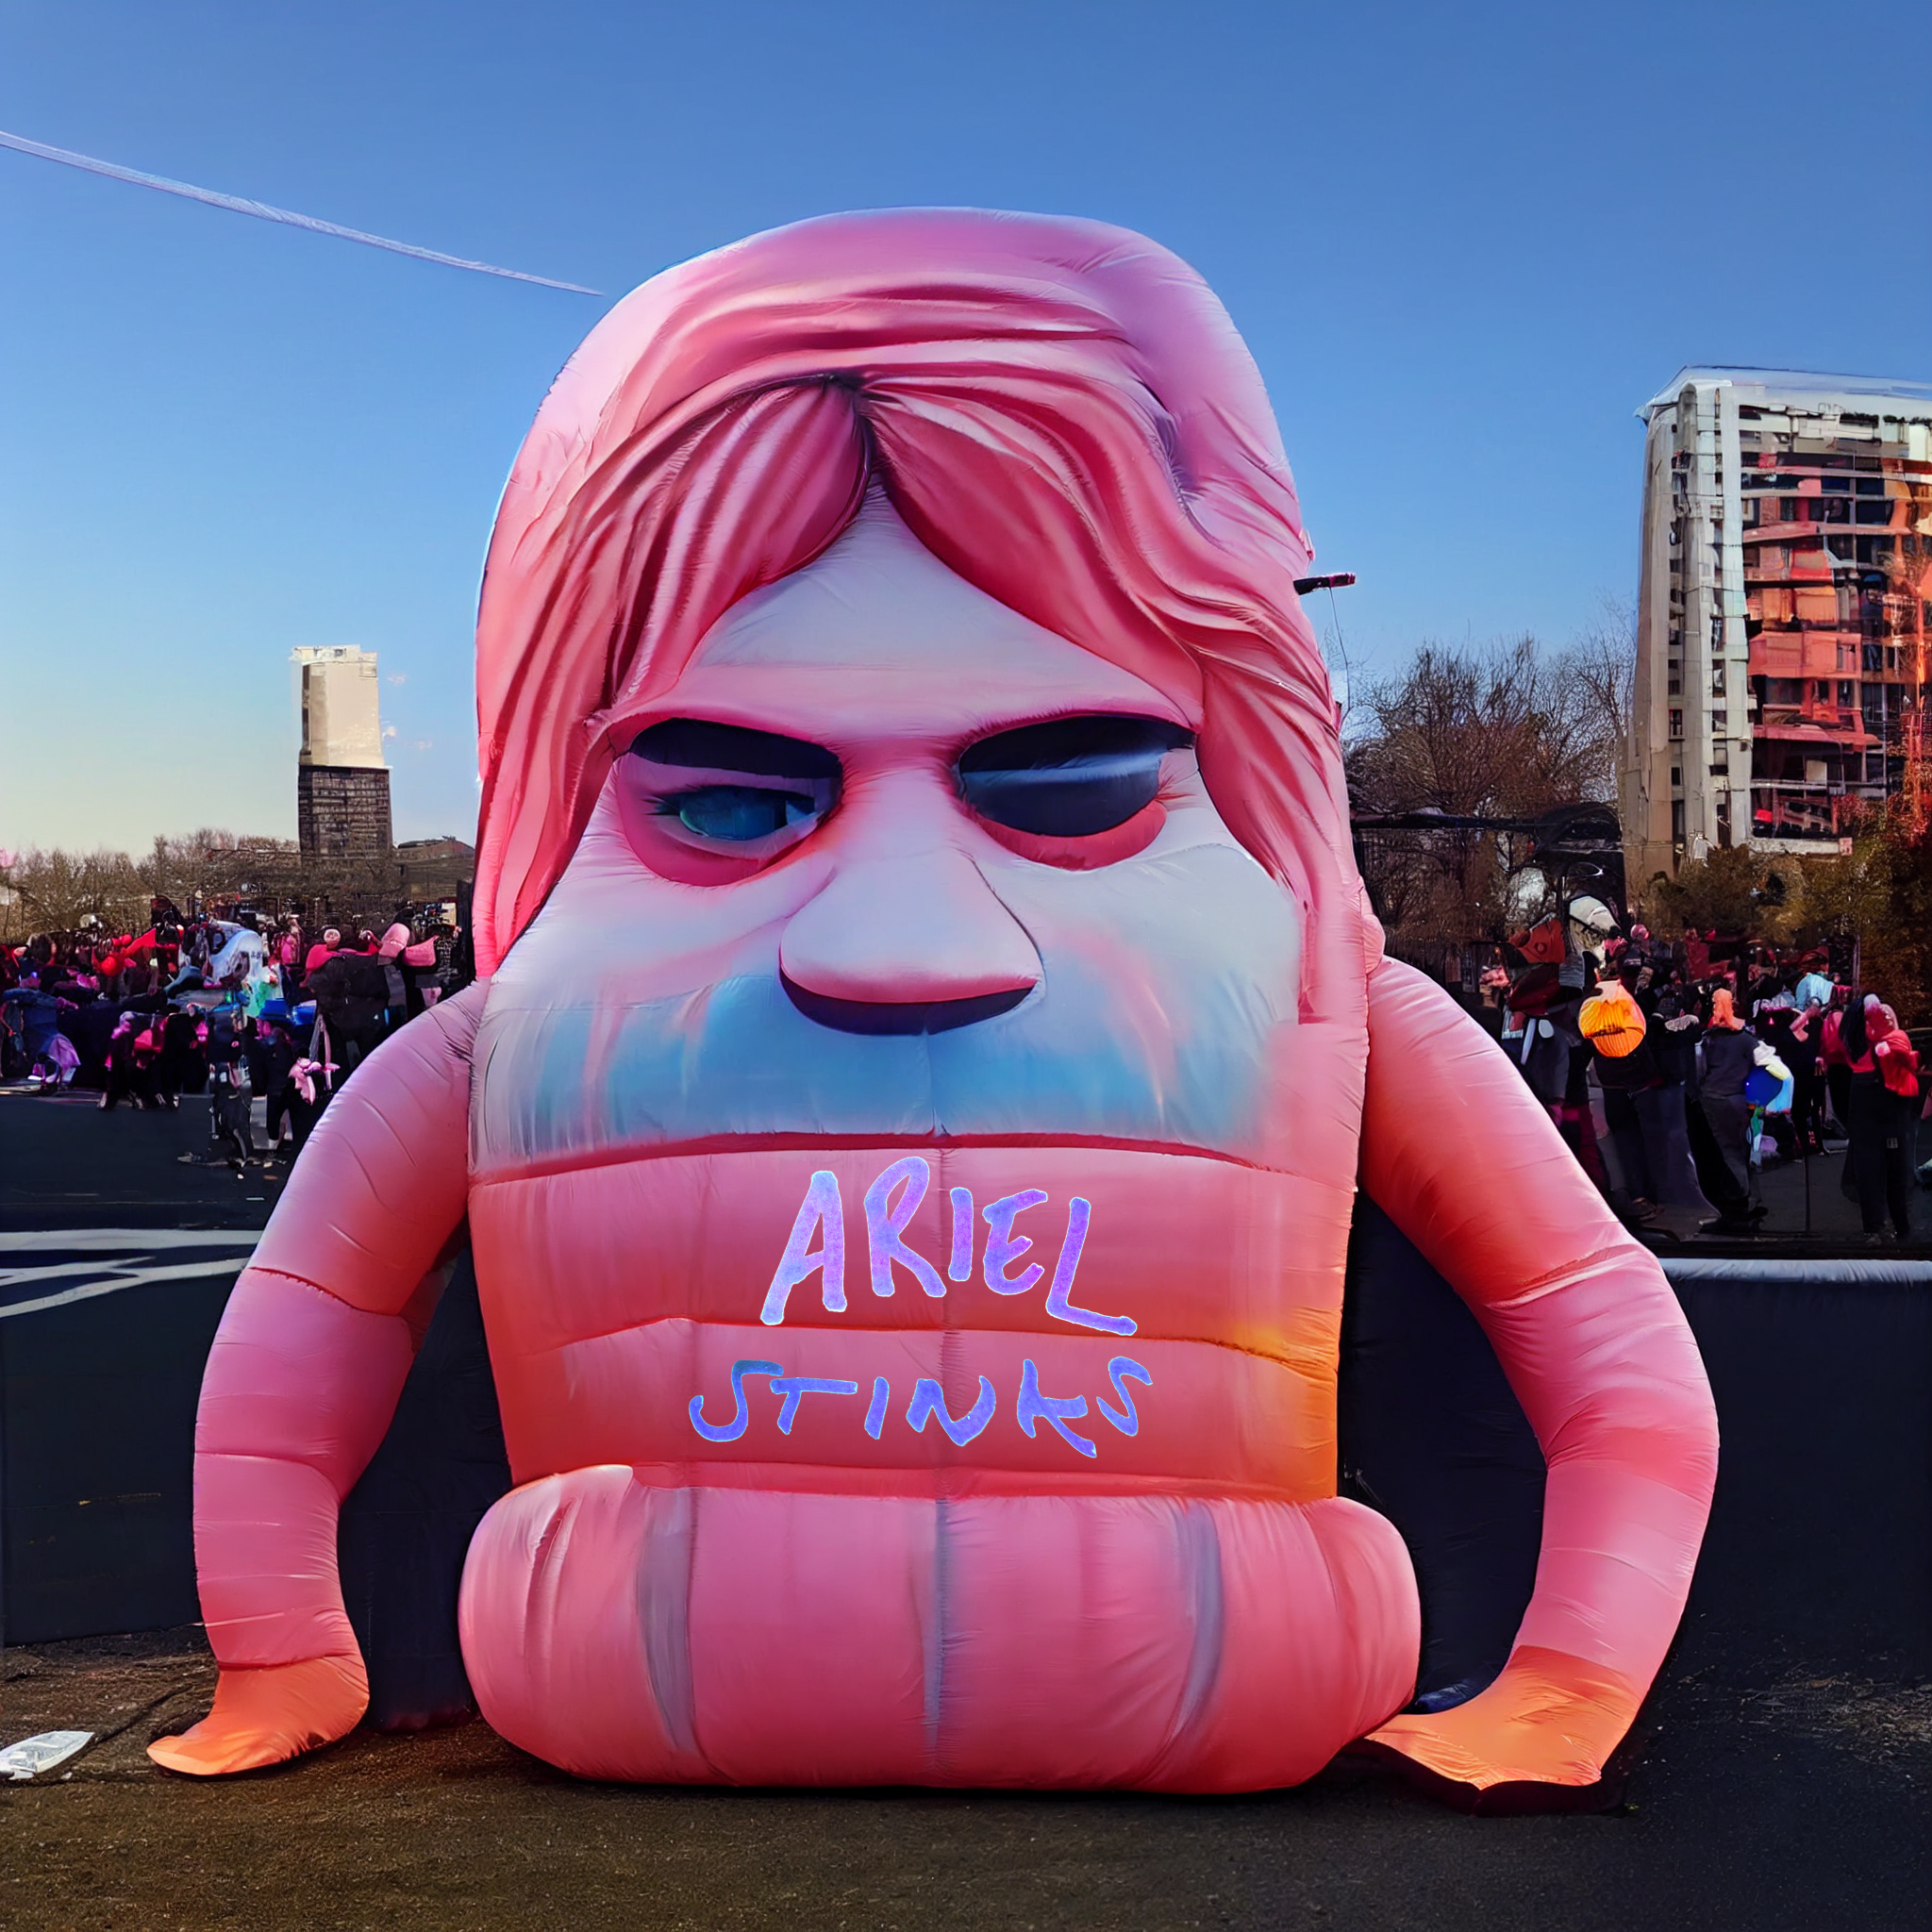 Ariel as Inflatable